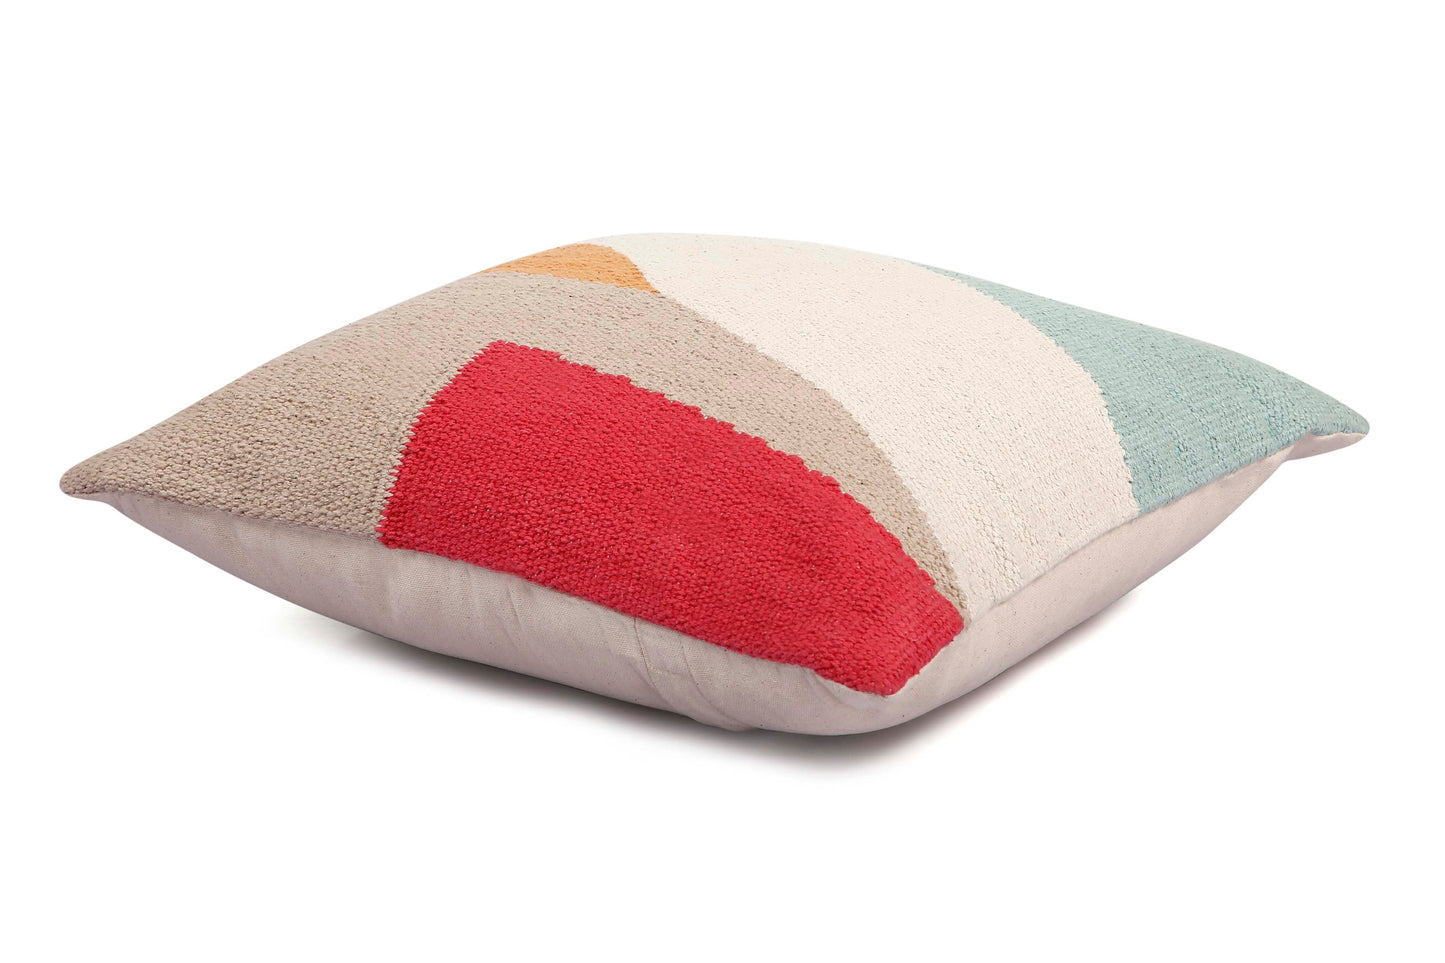 Leh Handcrafted Throw Pillow, Pink & Blue - 18x18 inch by The Artisen